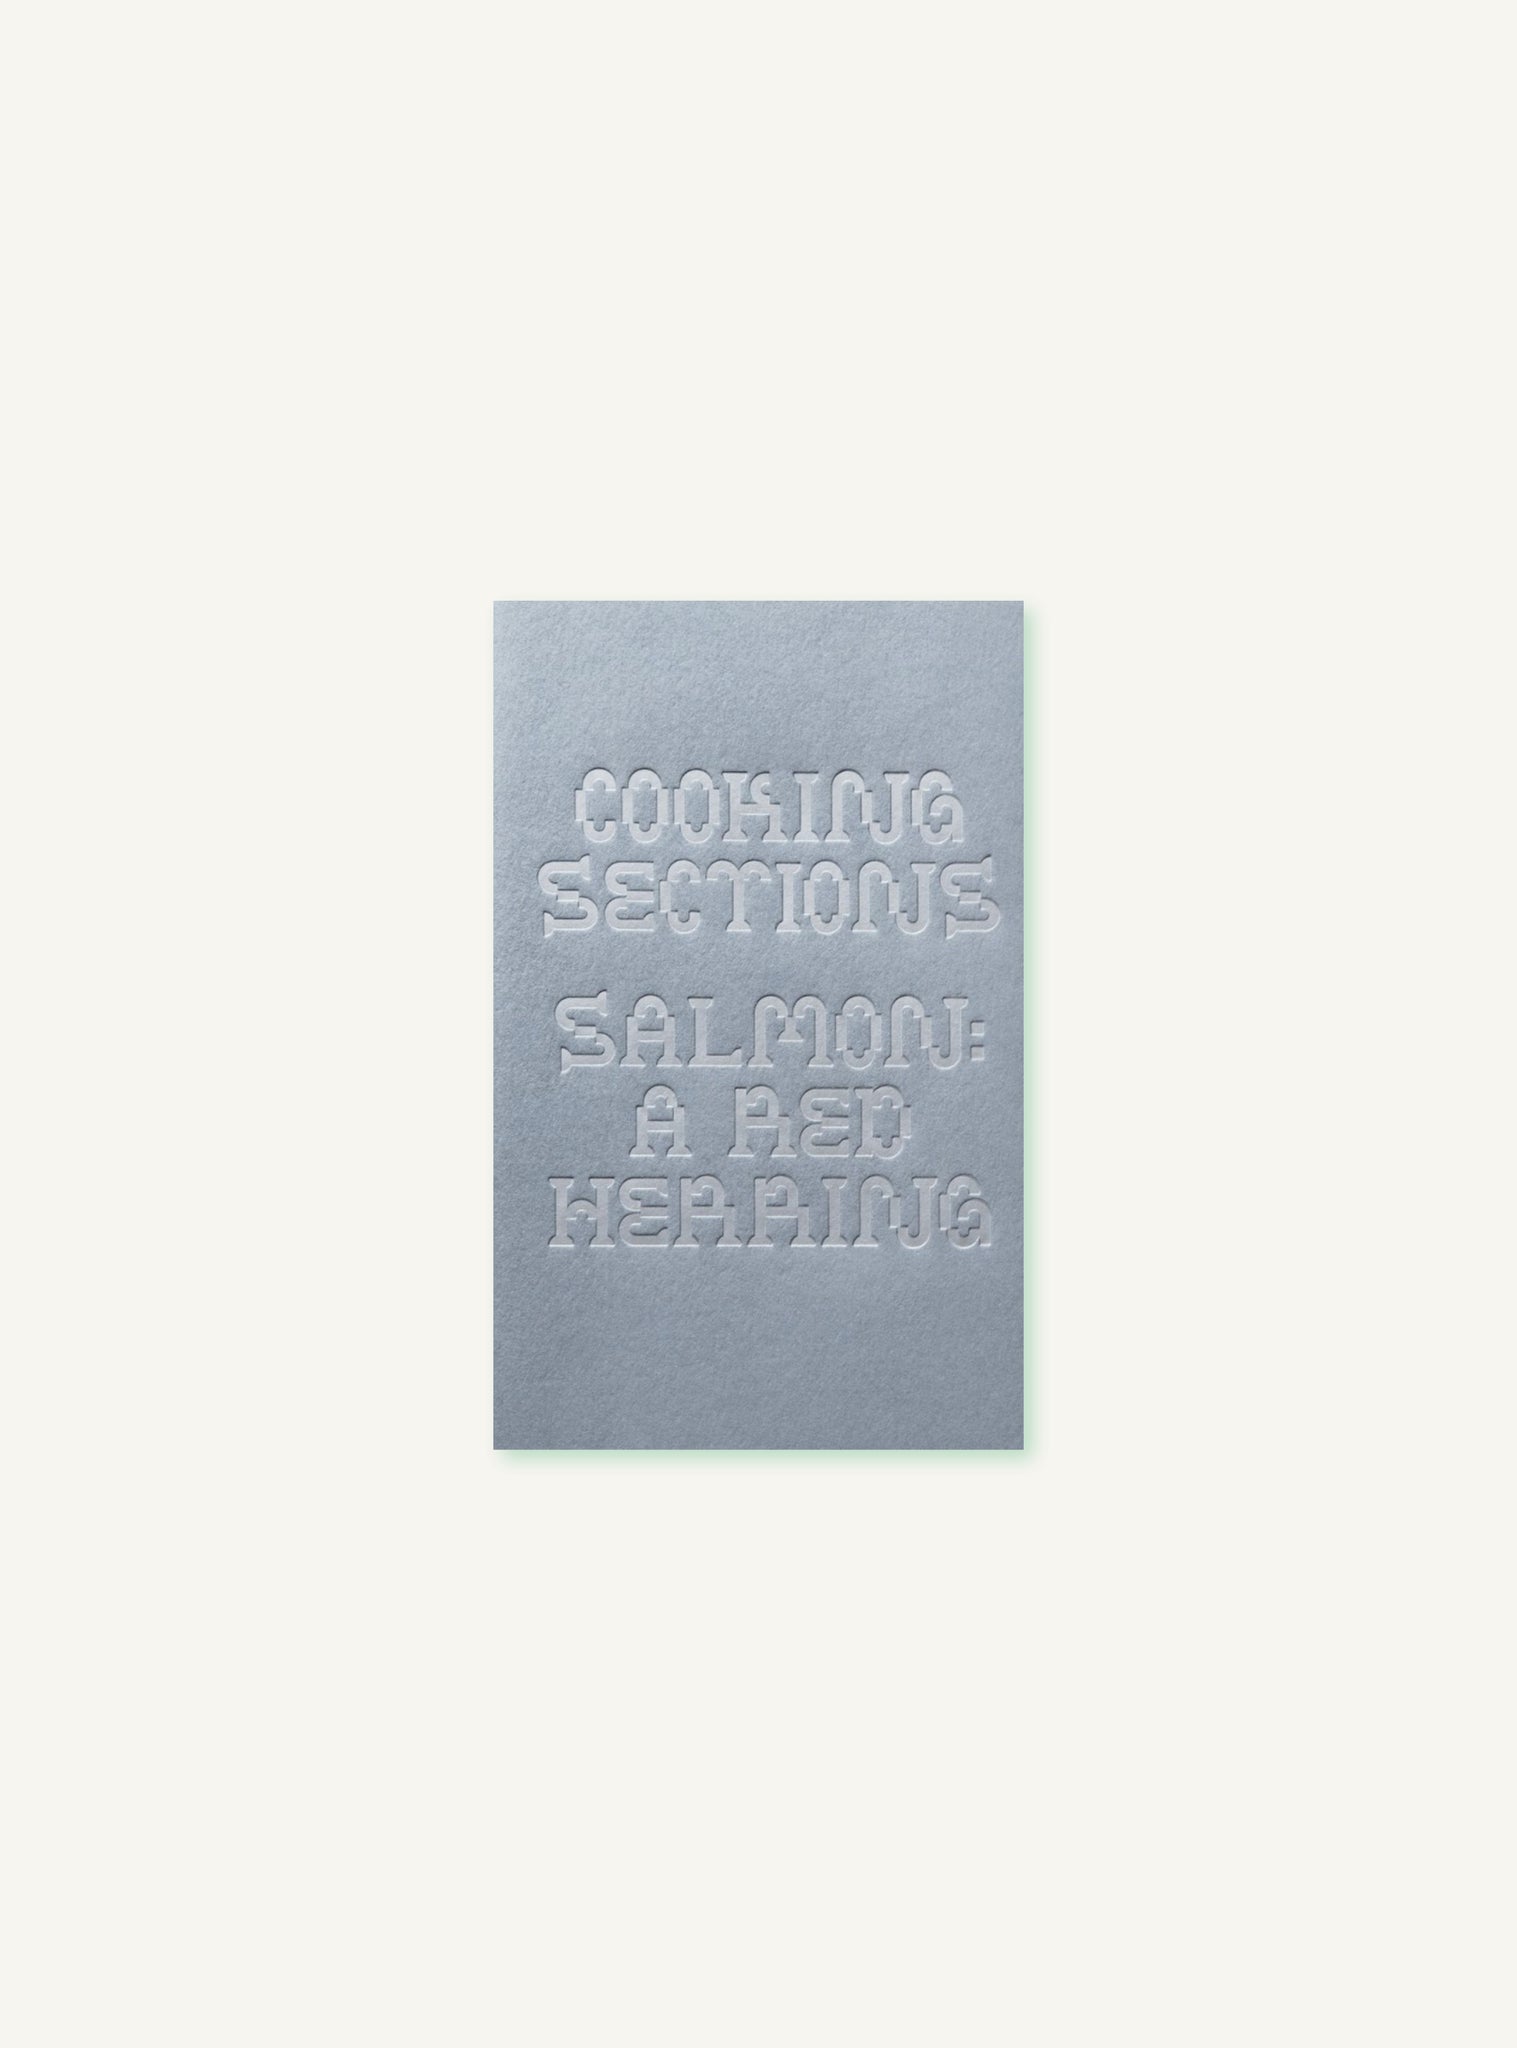 Cooking Sections, Salmon: A Red Herring (Isolarii 1)